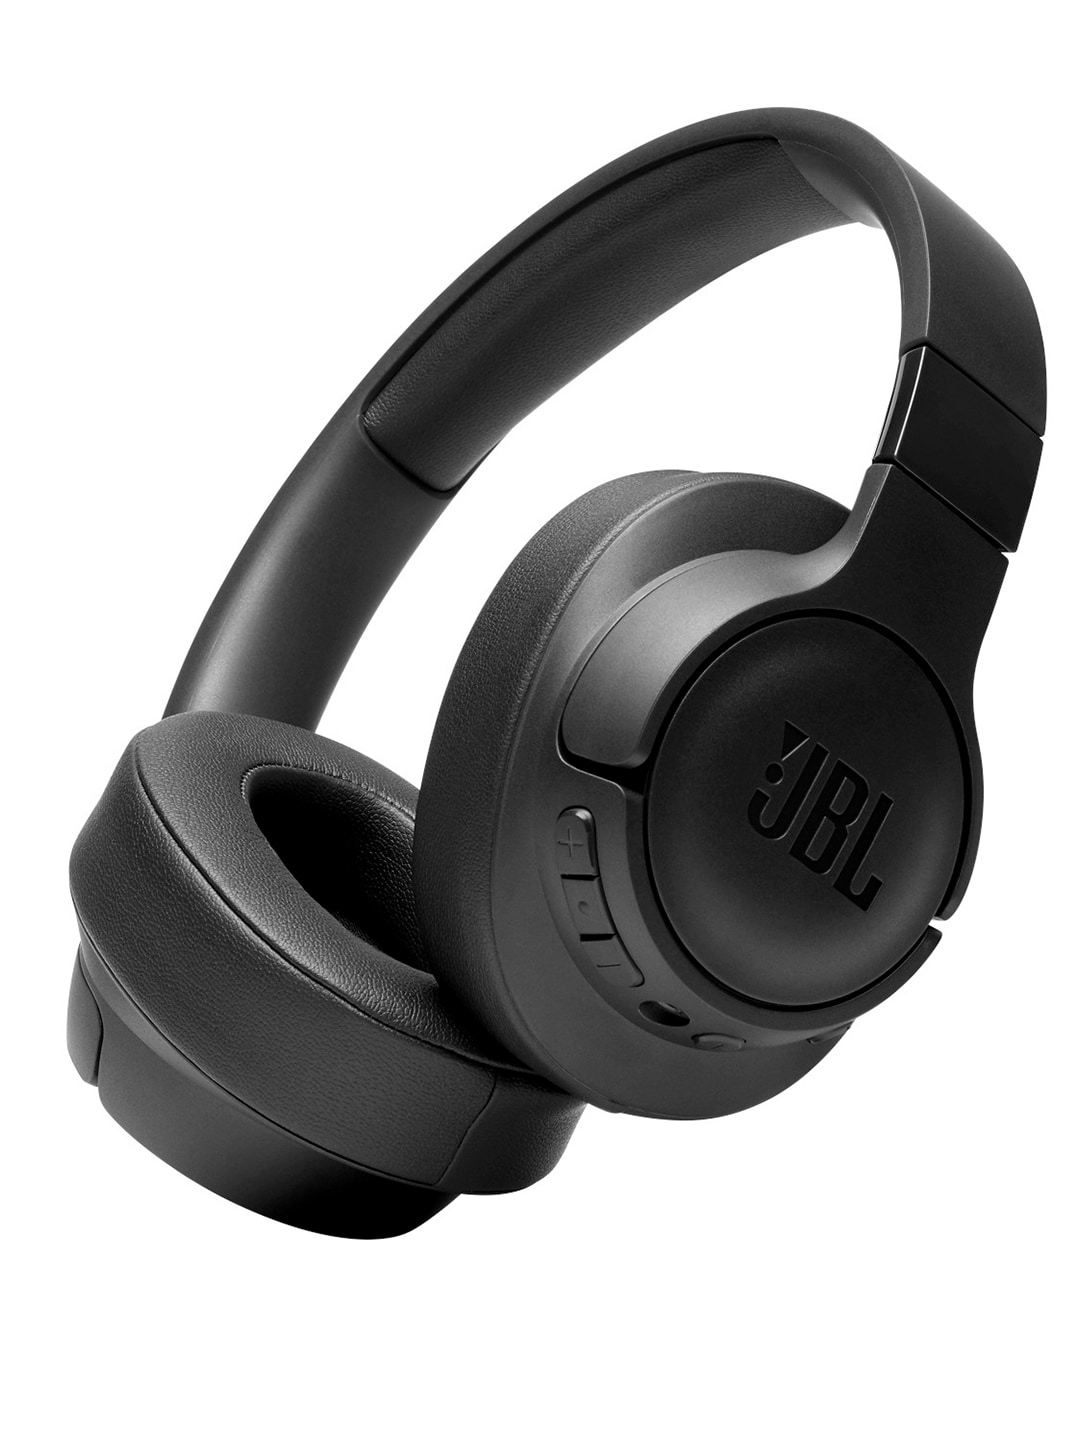 JBL Tune 760NC Active Noise Cancellation Wireless Over Ear Headphones with Mic - Black Price in India